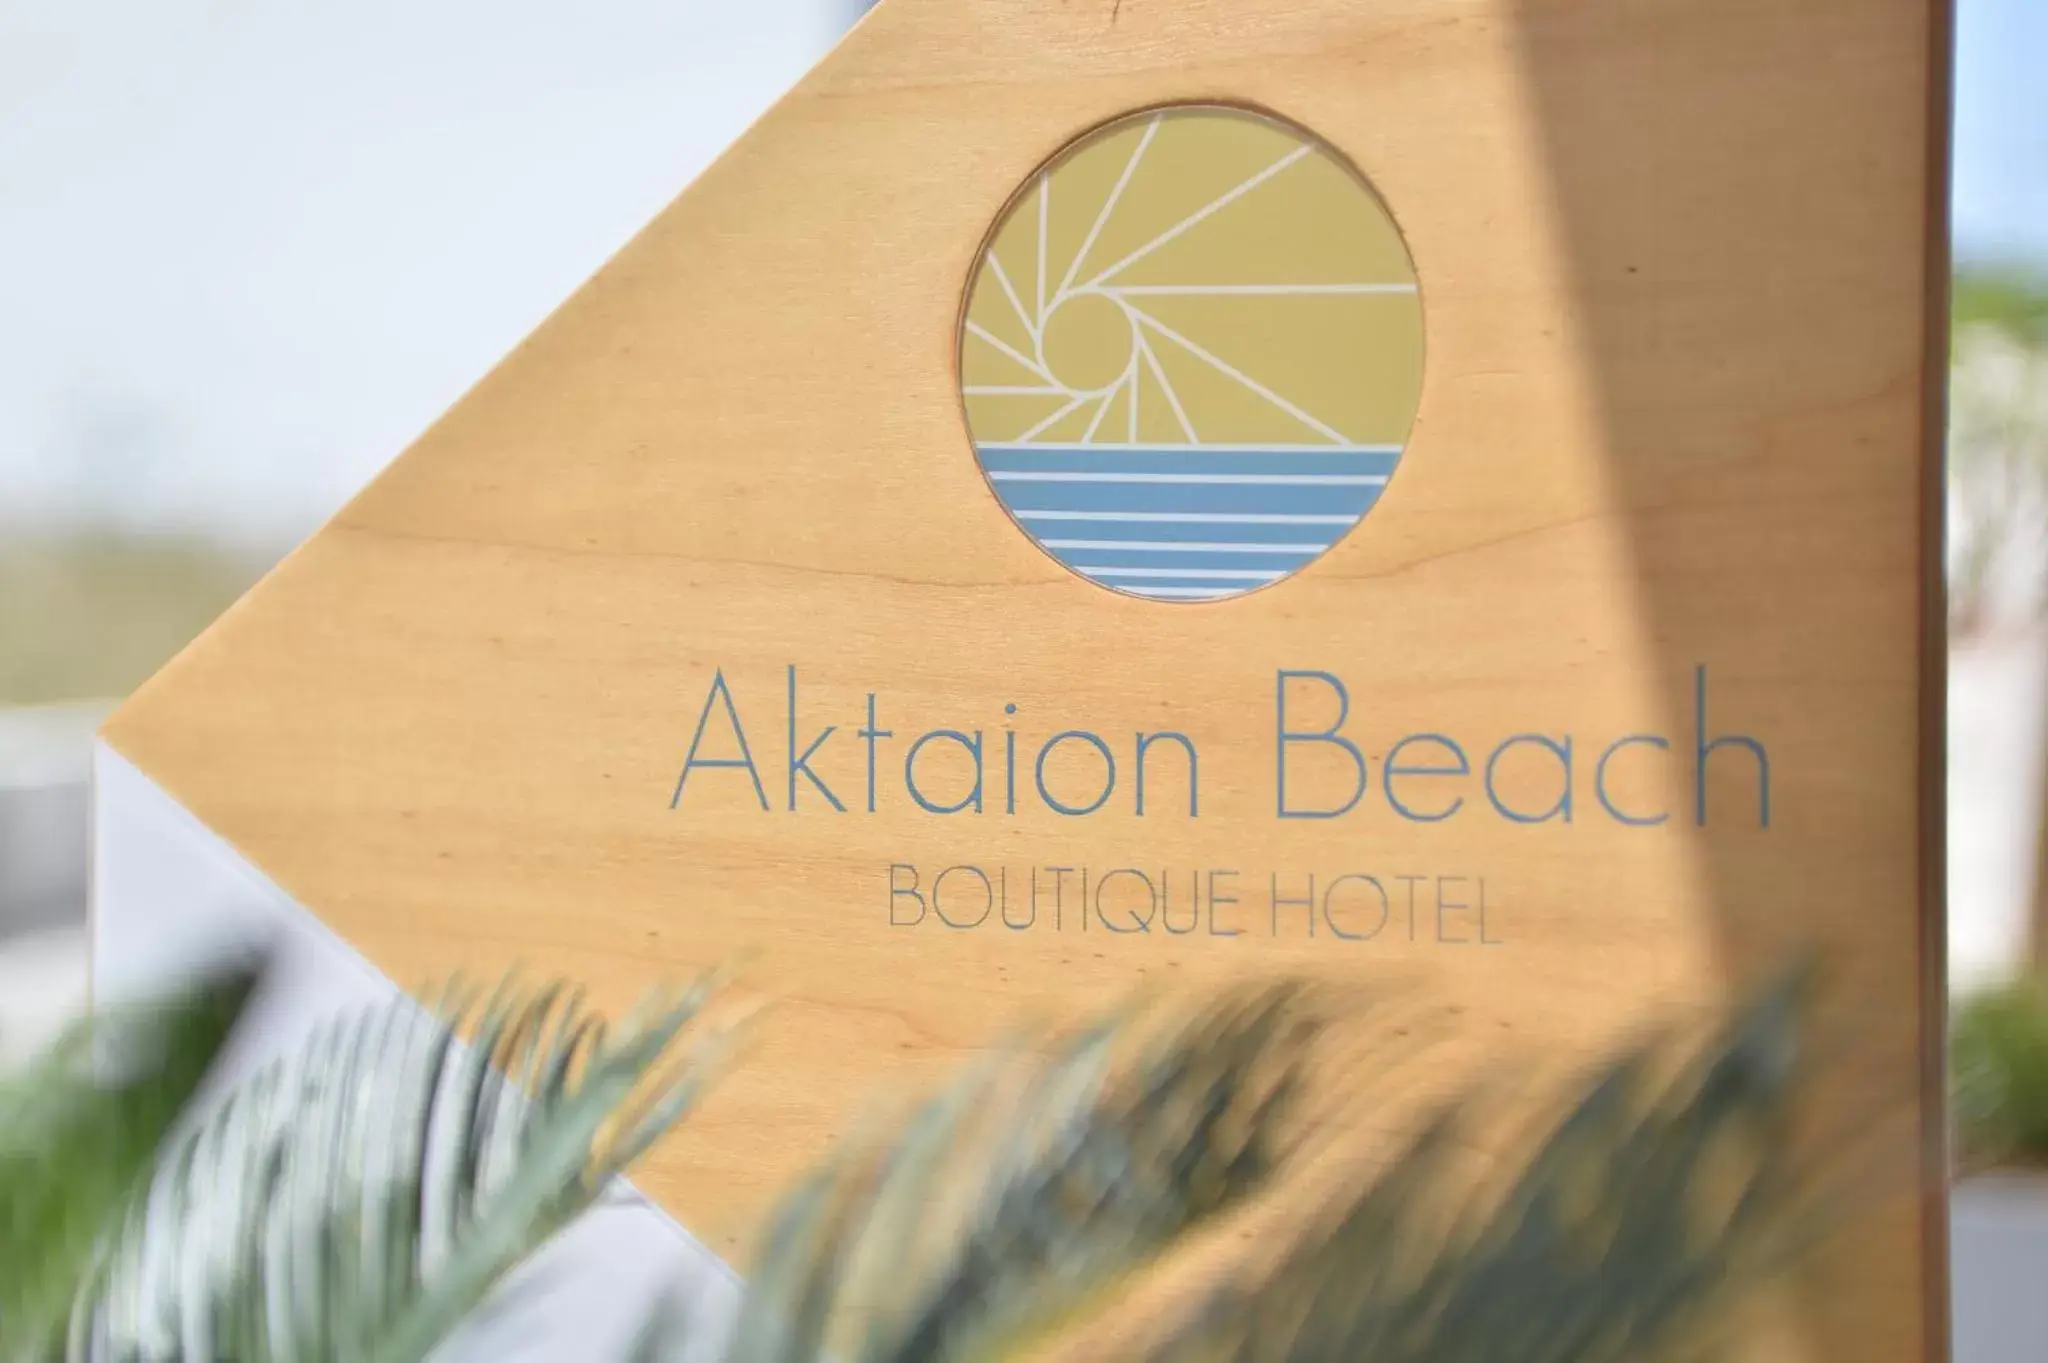 Property logo or sign, Property Logo/Sign in Aktaion Beach Boutique Hotel & Spa